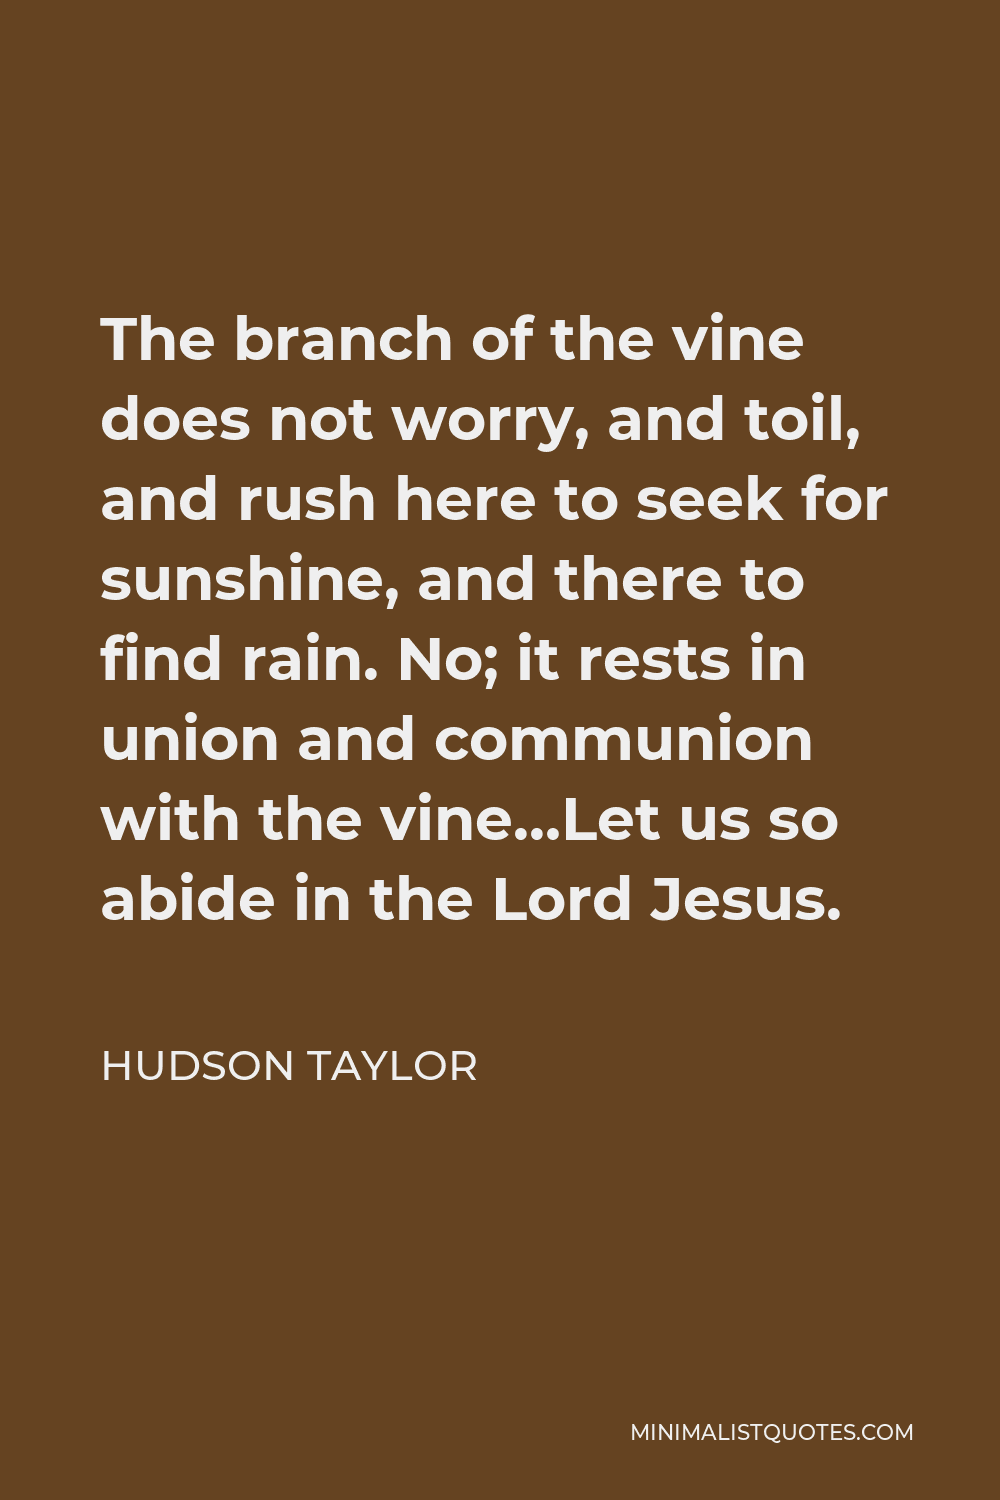 Hudson Taylor Quote - The branch of the vine does not worry, and toil, and rush here to seek for sunshine, and there to find rain. No; it rests in union and communion with the vine…Let us so abide in the Lord Jesus.